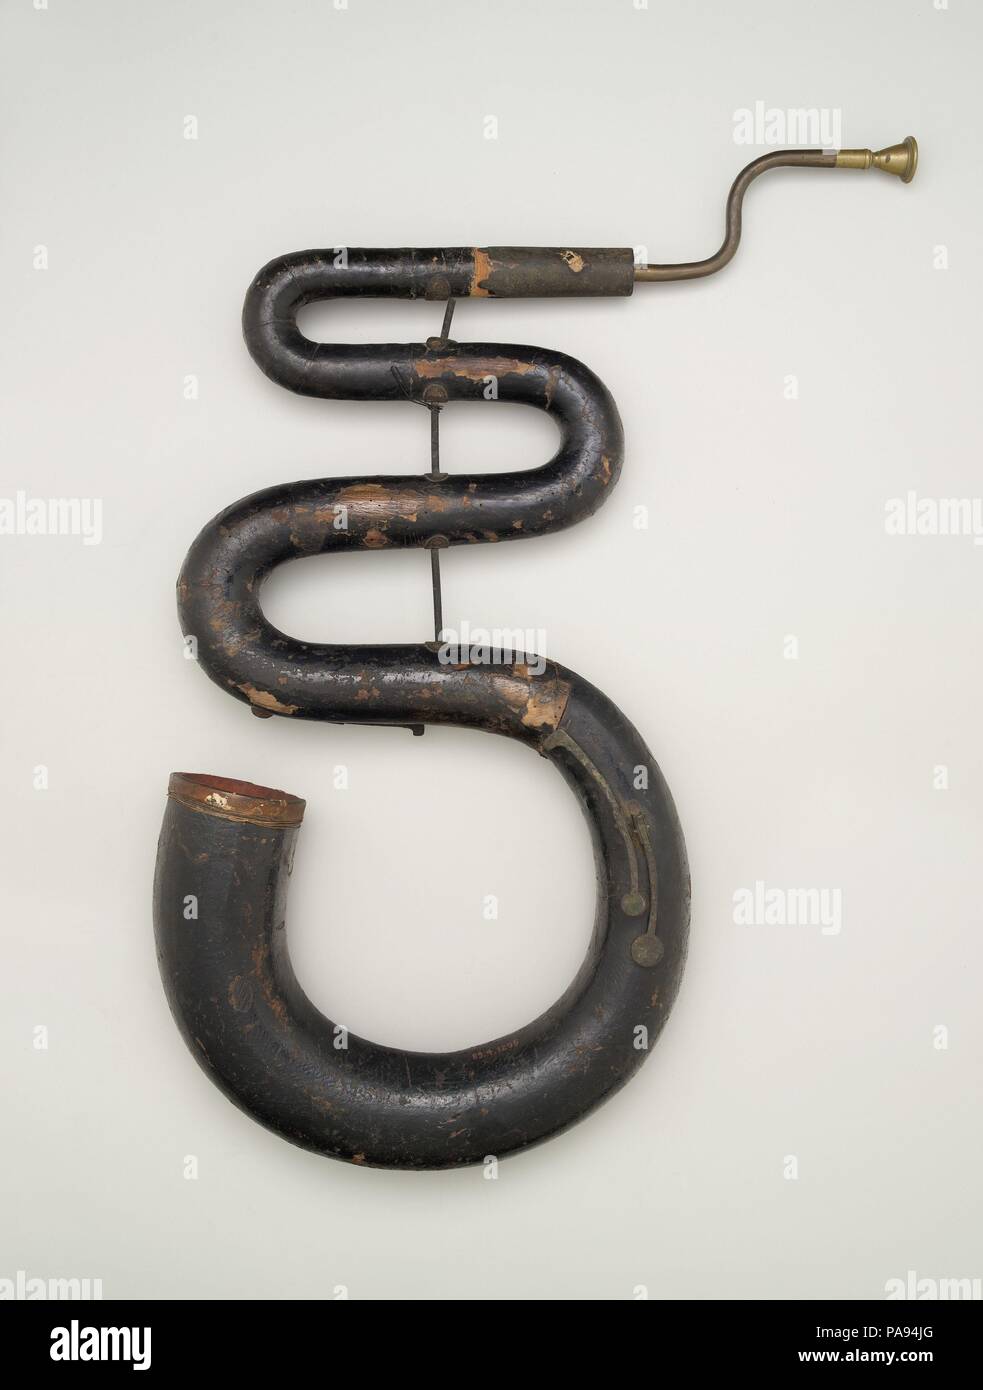 Serpent in C. Culture: British. Dimensions: Length  725 mm, Diam. of bell  105 mm, Length of crook ca. 247 mm. Date: early 19th century. Museum: Metropolitan Museum of Art, New York, USA. Stock Photo